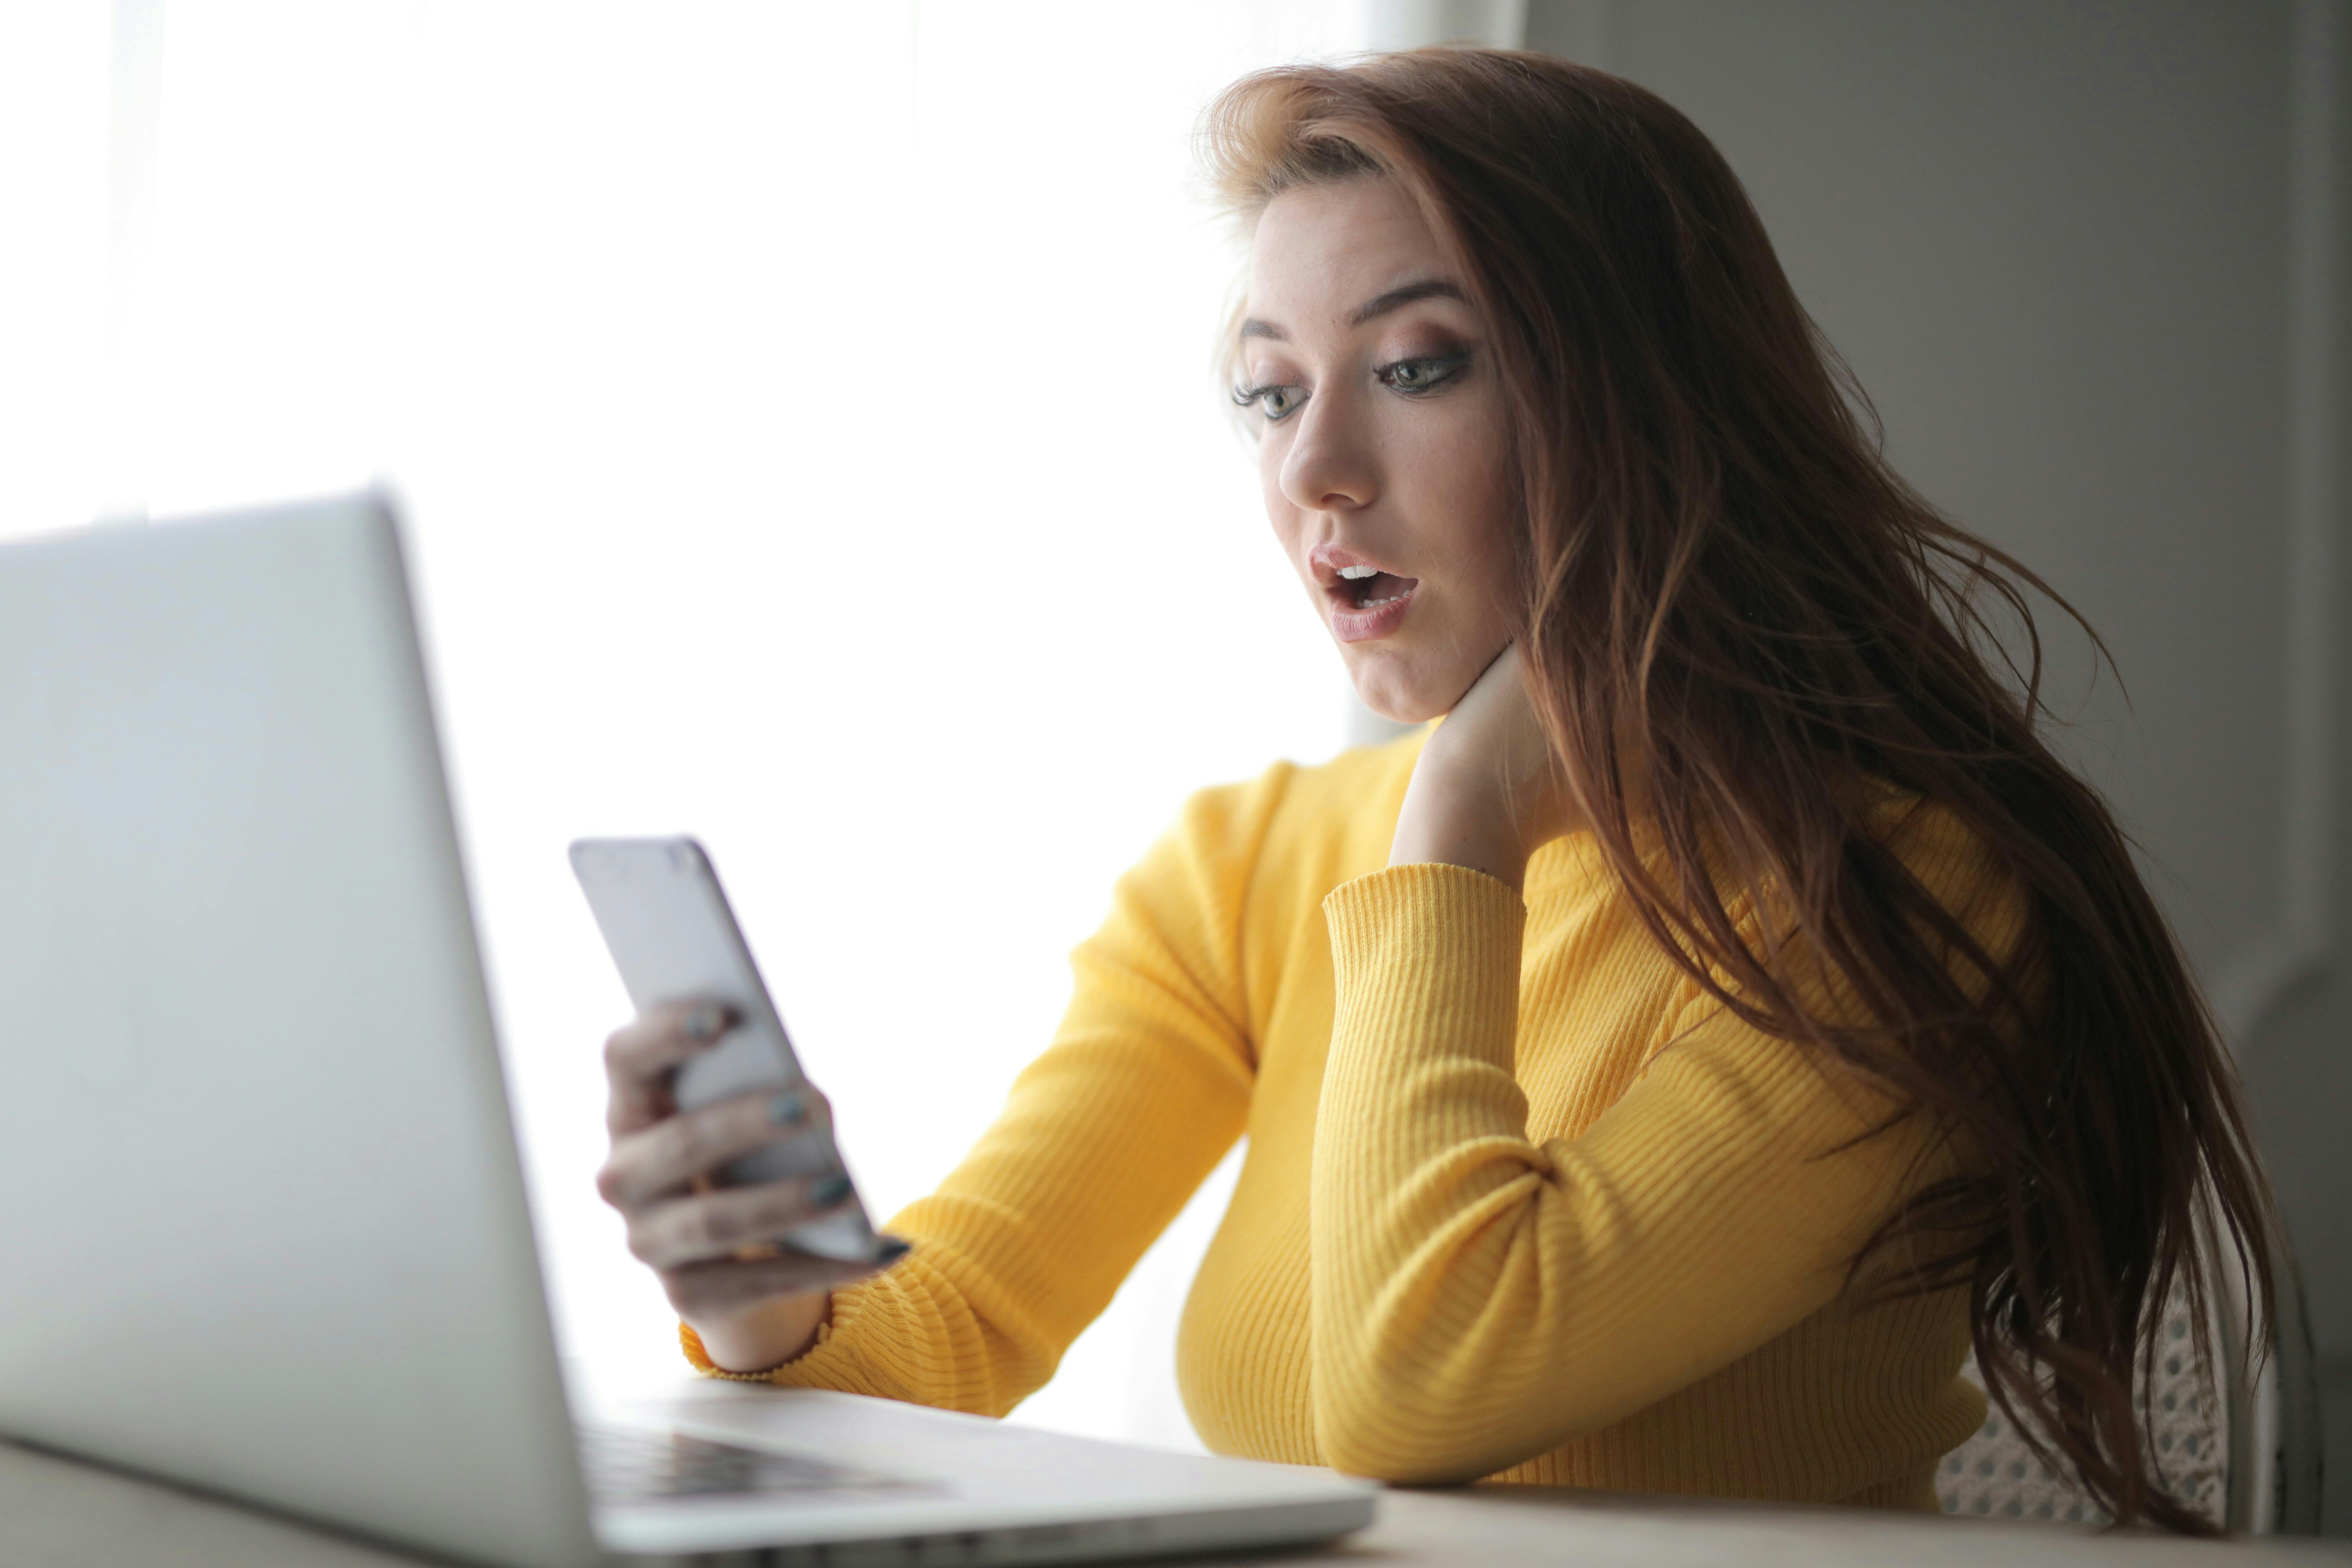 A shocked woman looking at her phone with a laptop on a desk | Source: Pexels